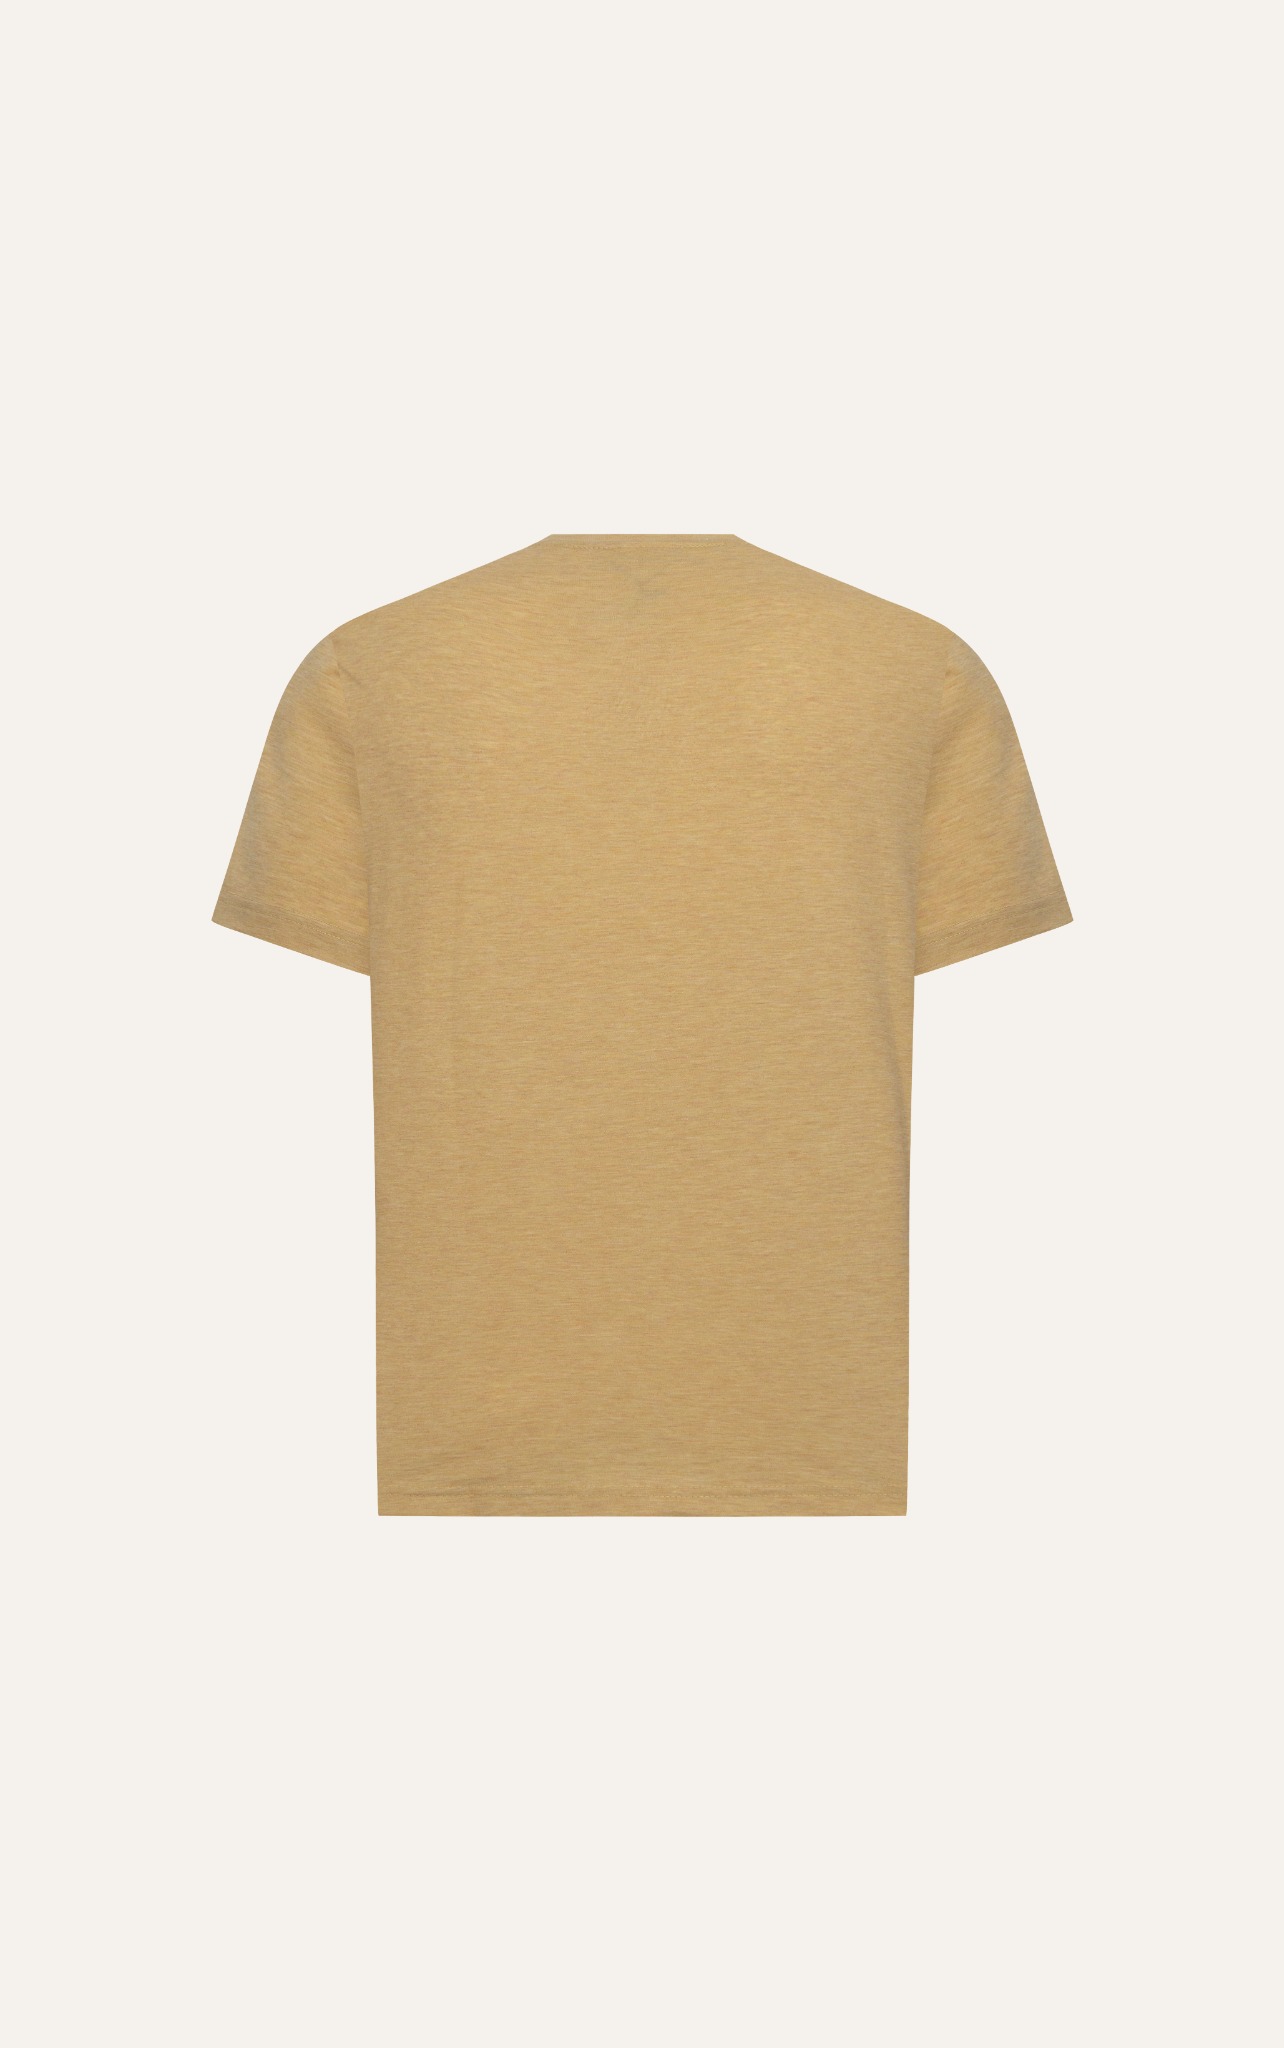 AG60 FACTORY REGULAR FIT EMBROIDERED "AMUS" T-SHIRT - YELLOW